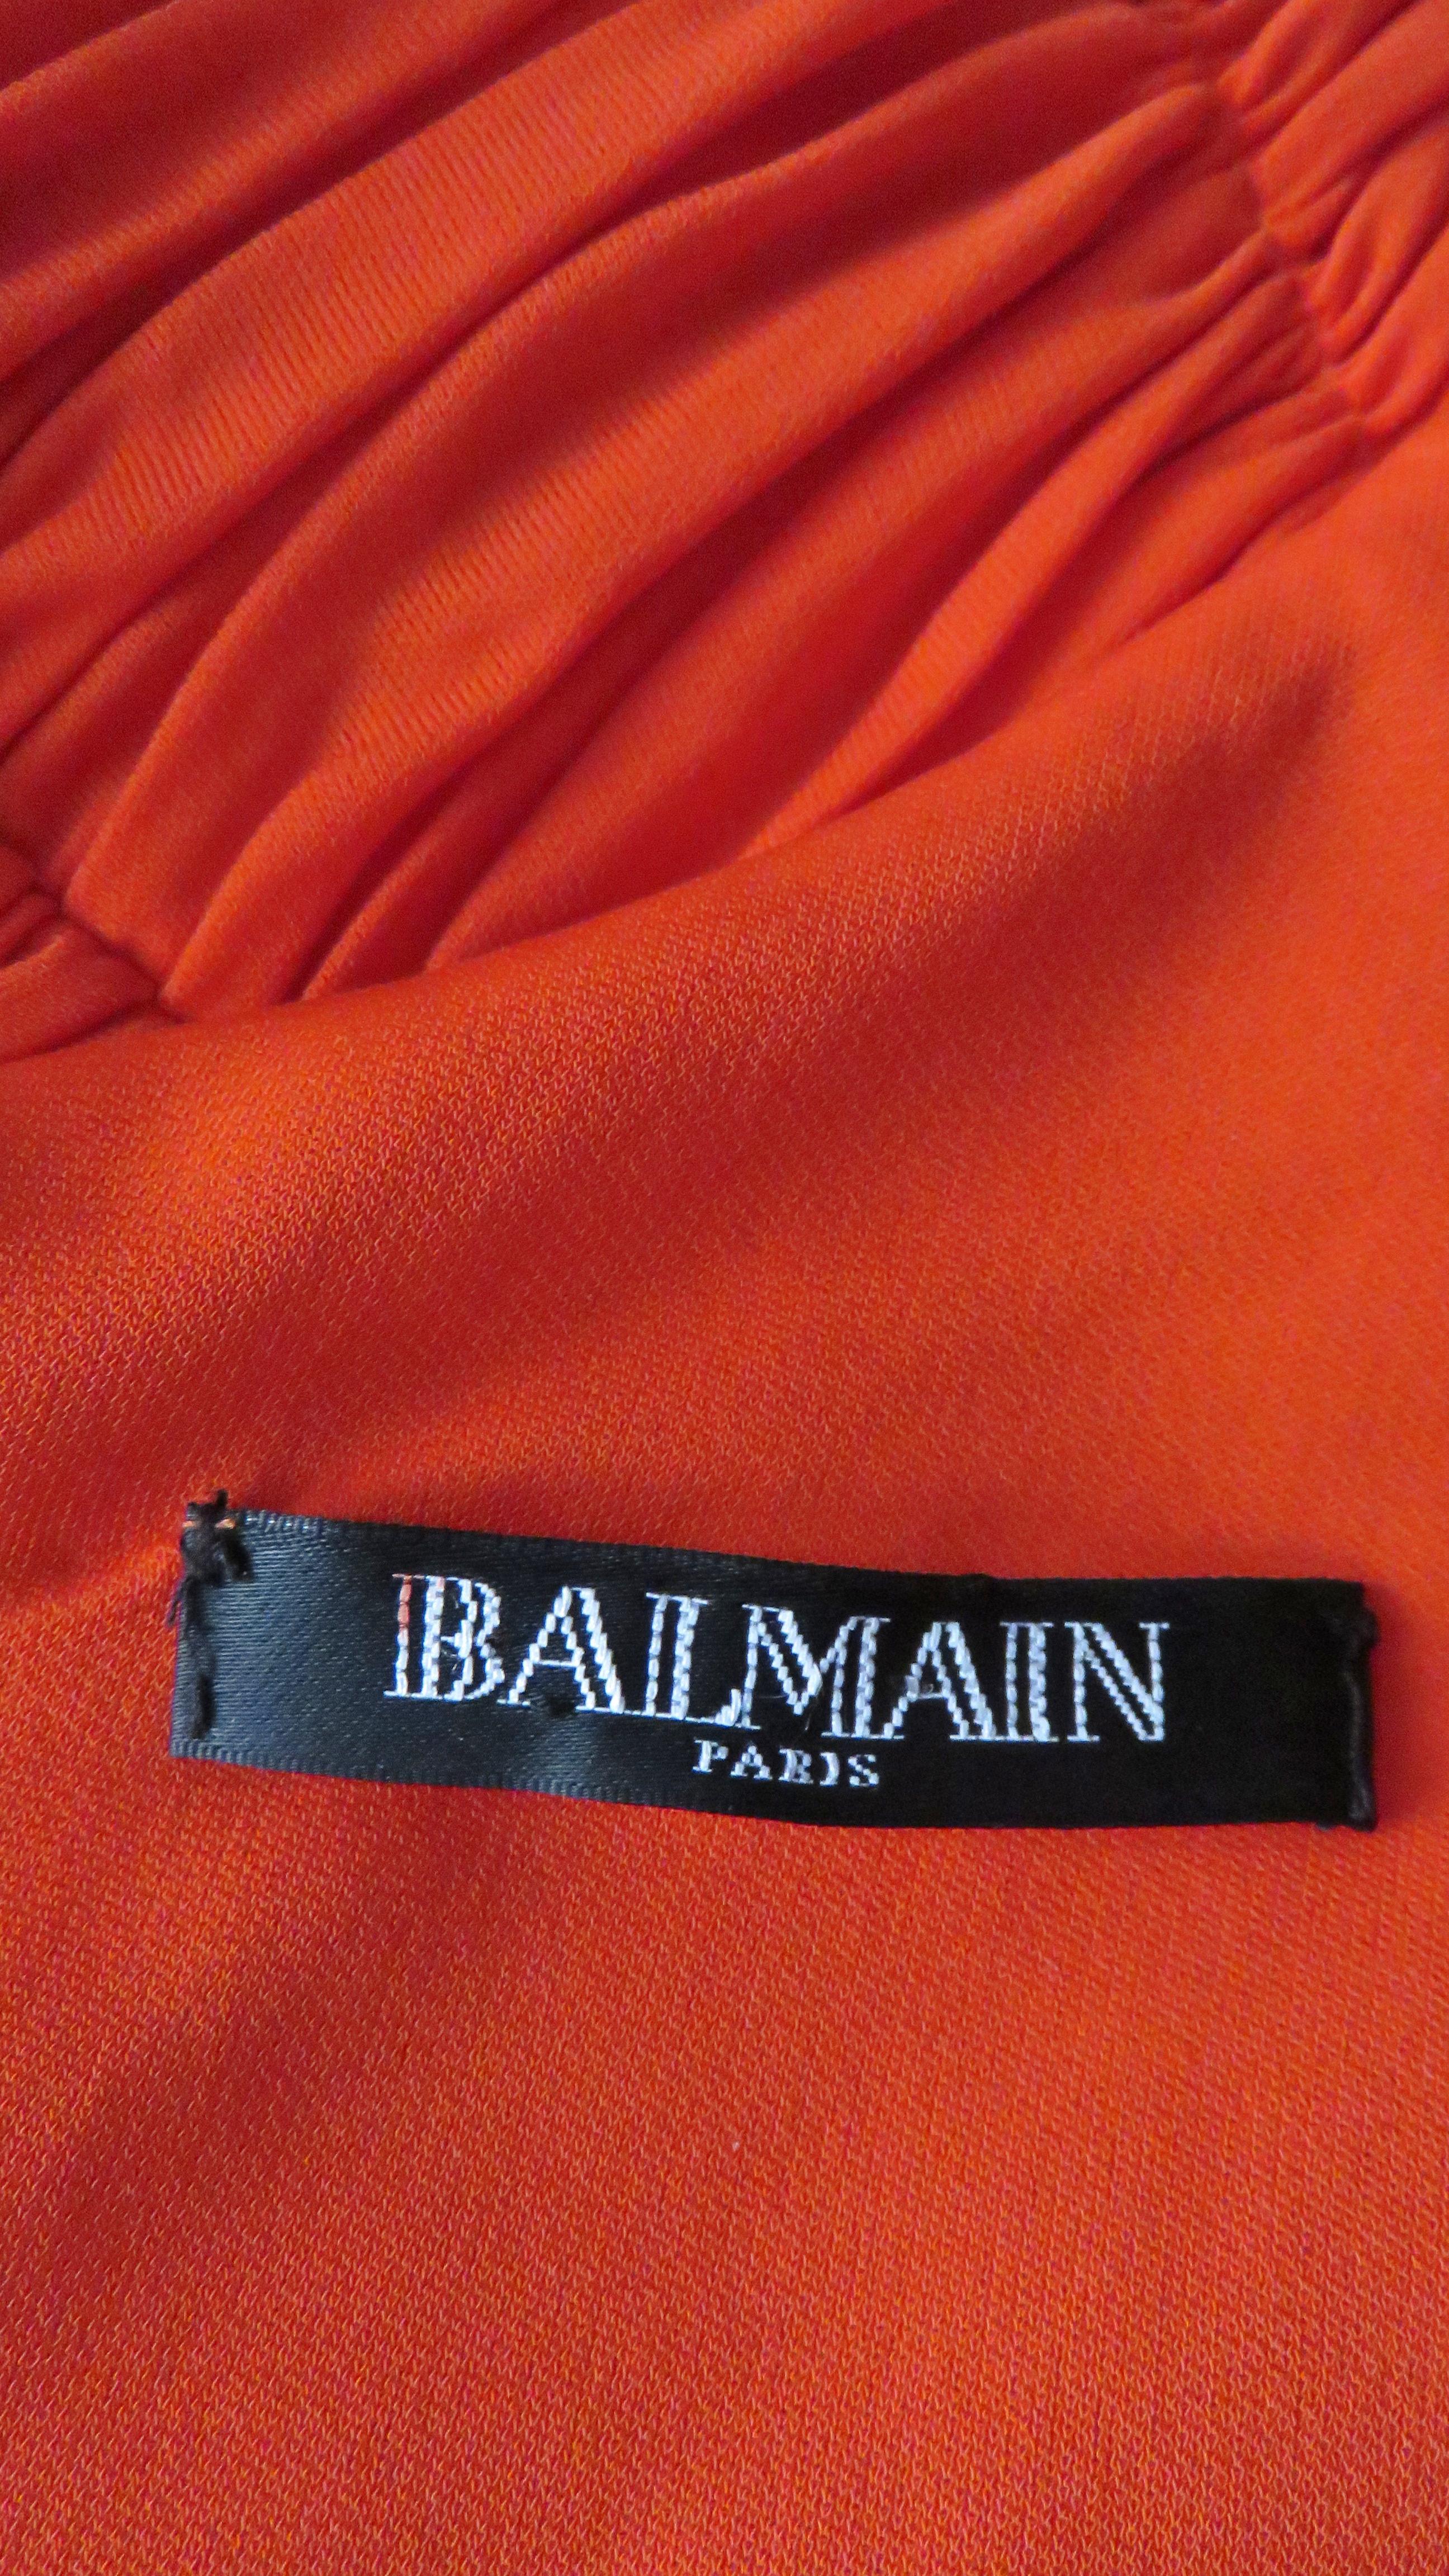 Pierre Balmain Ruched Dress For Sale 9